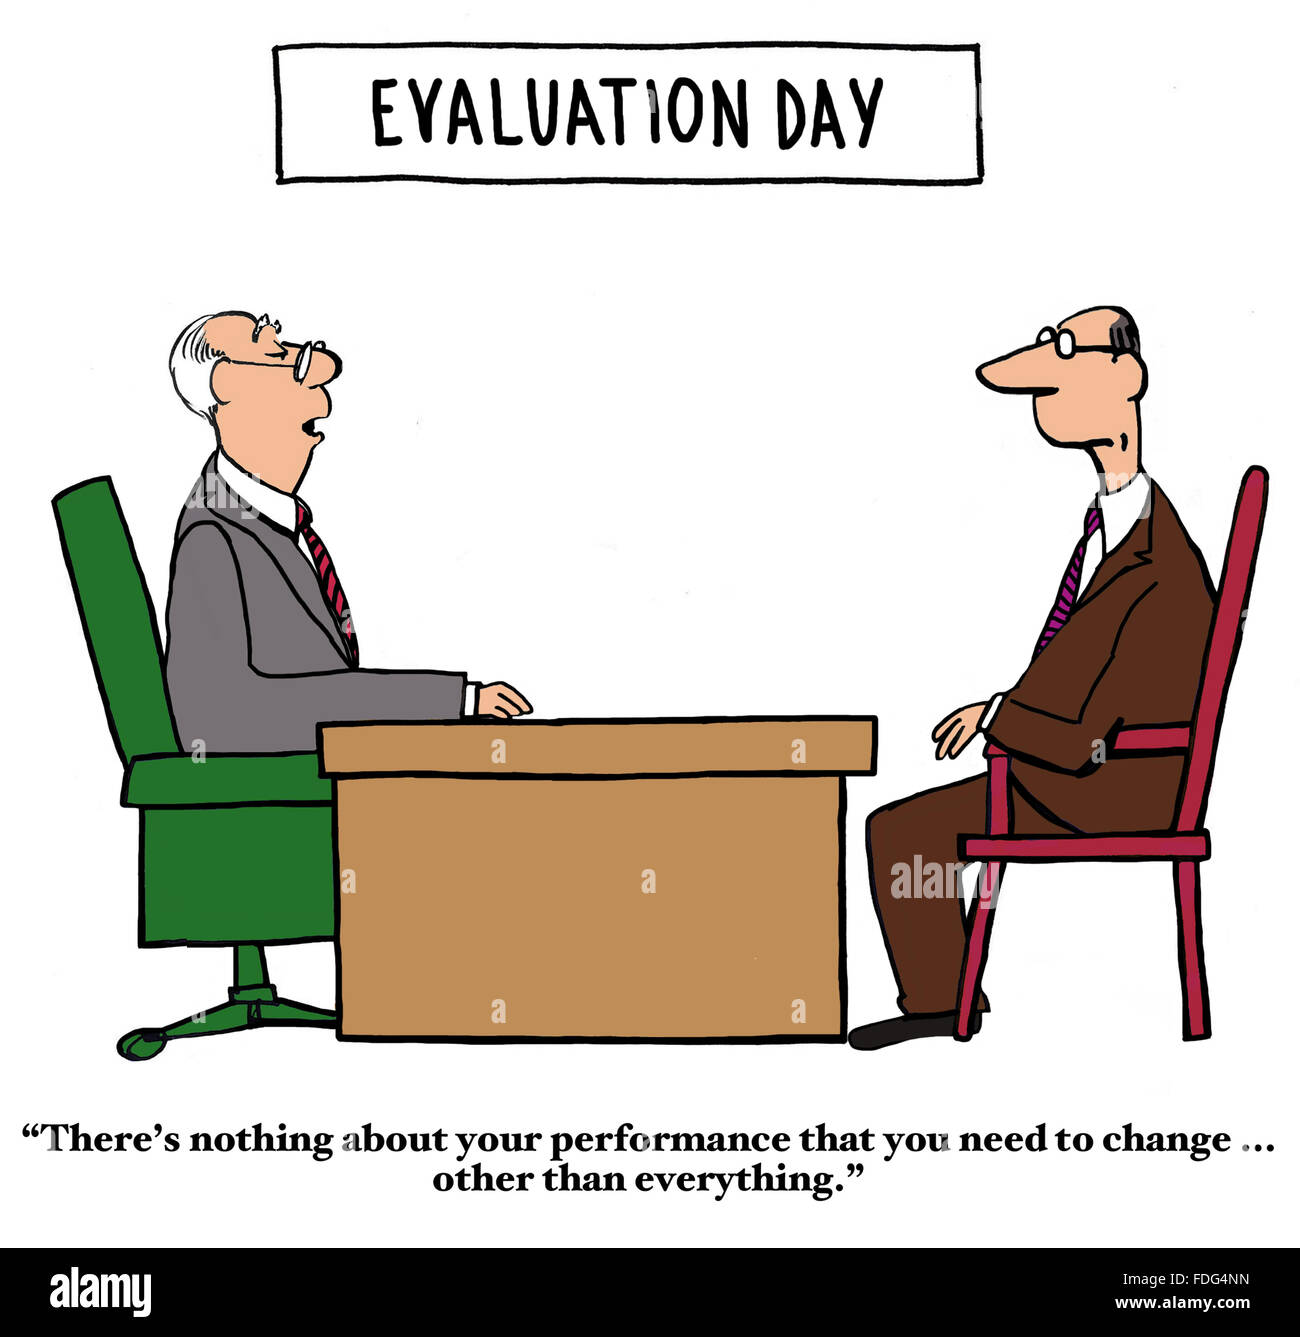 Performance review cartoon.  On evaluation day the worker learns the boss feels he needs to change everything about his work. Stock Photo